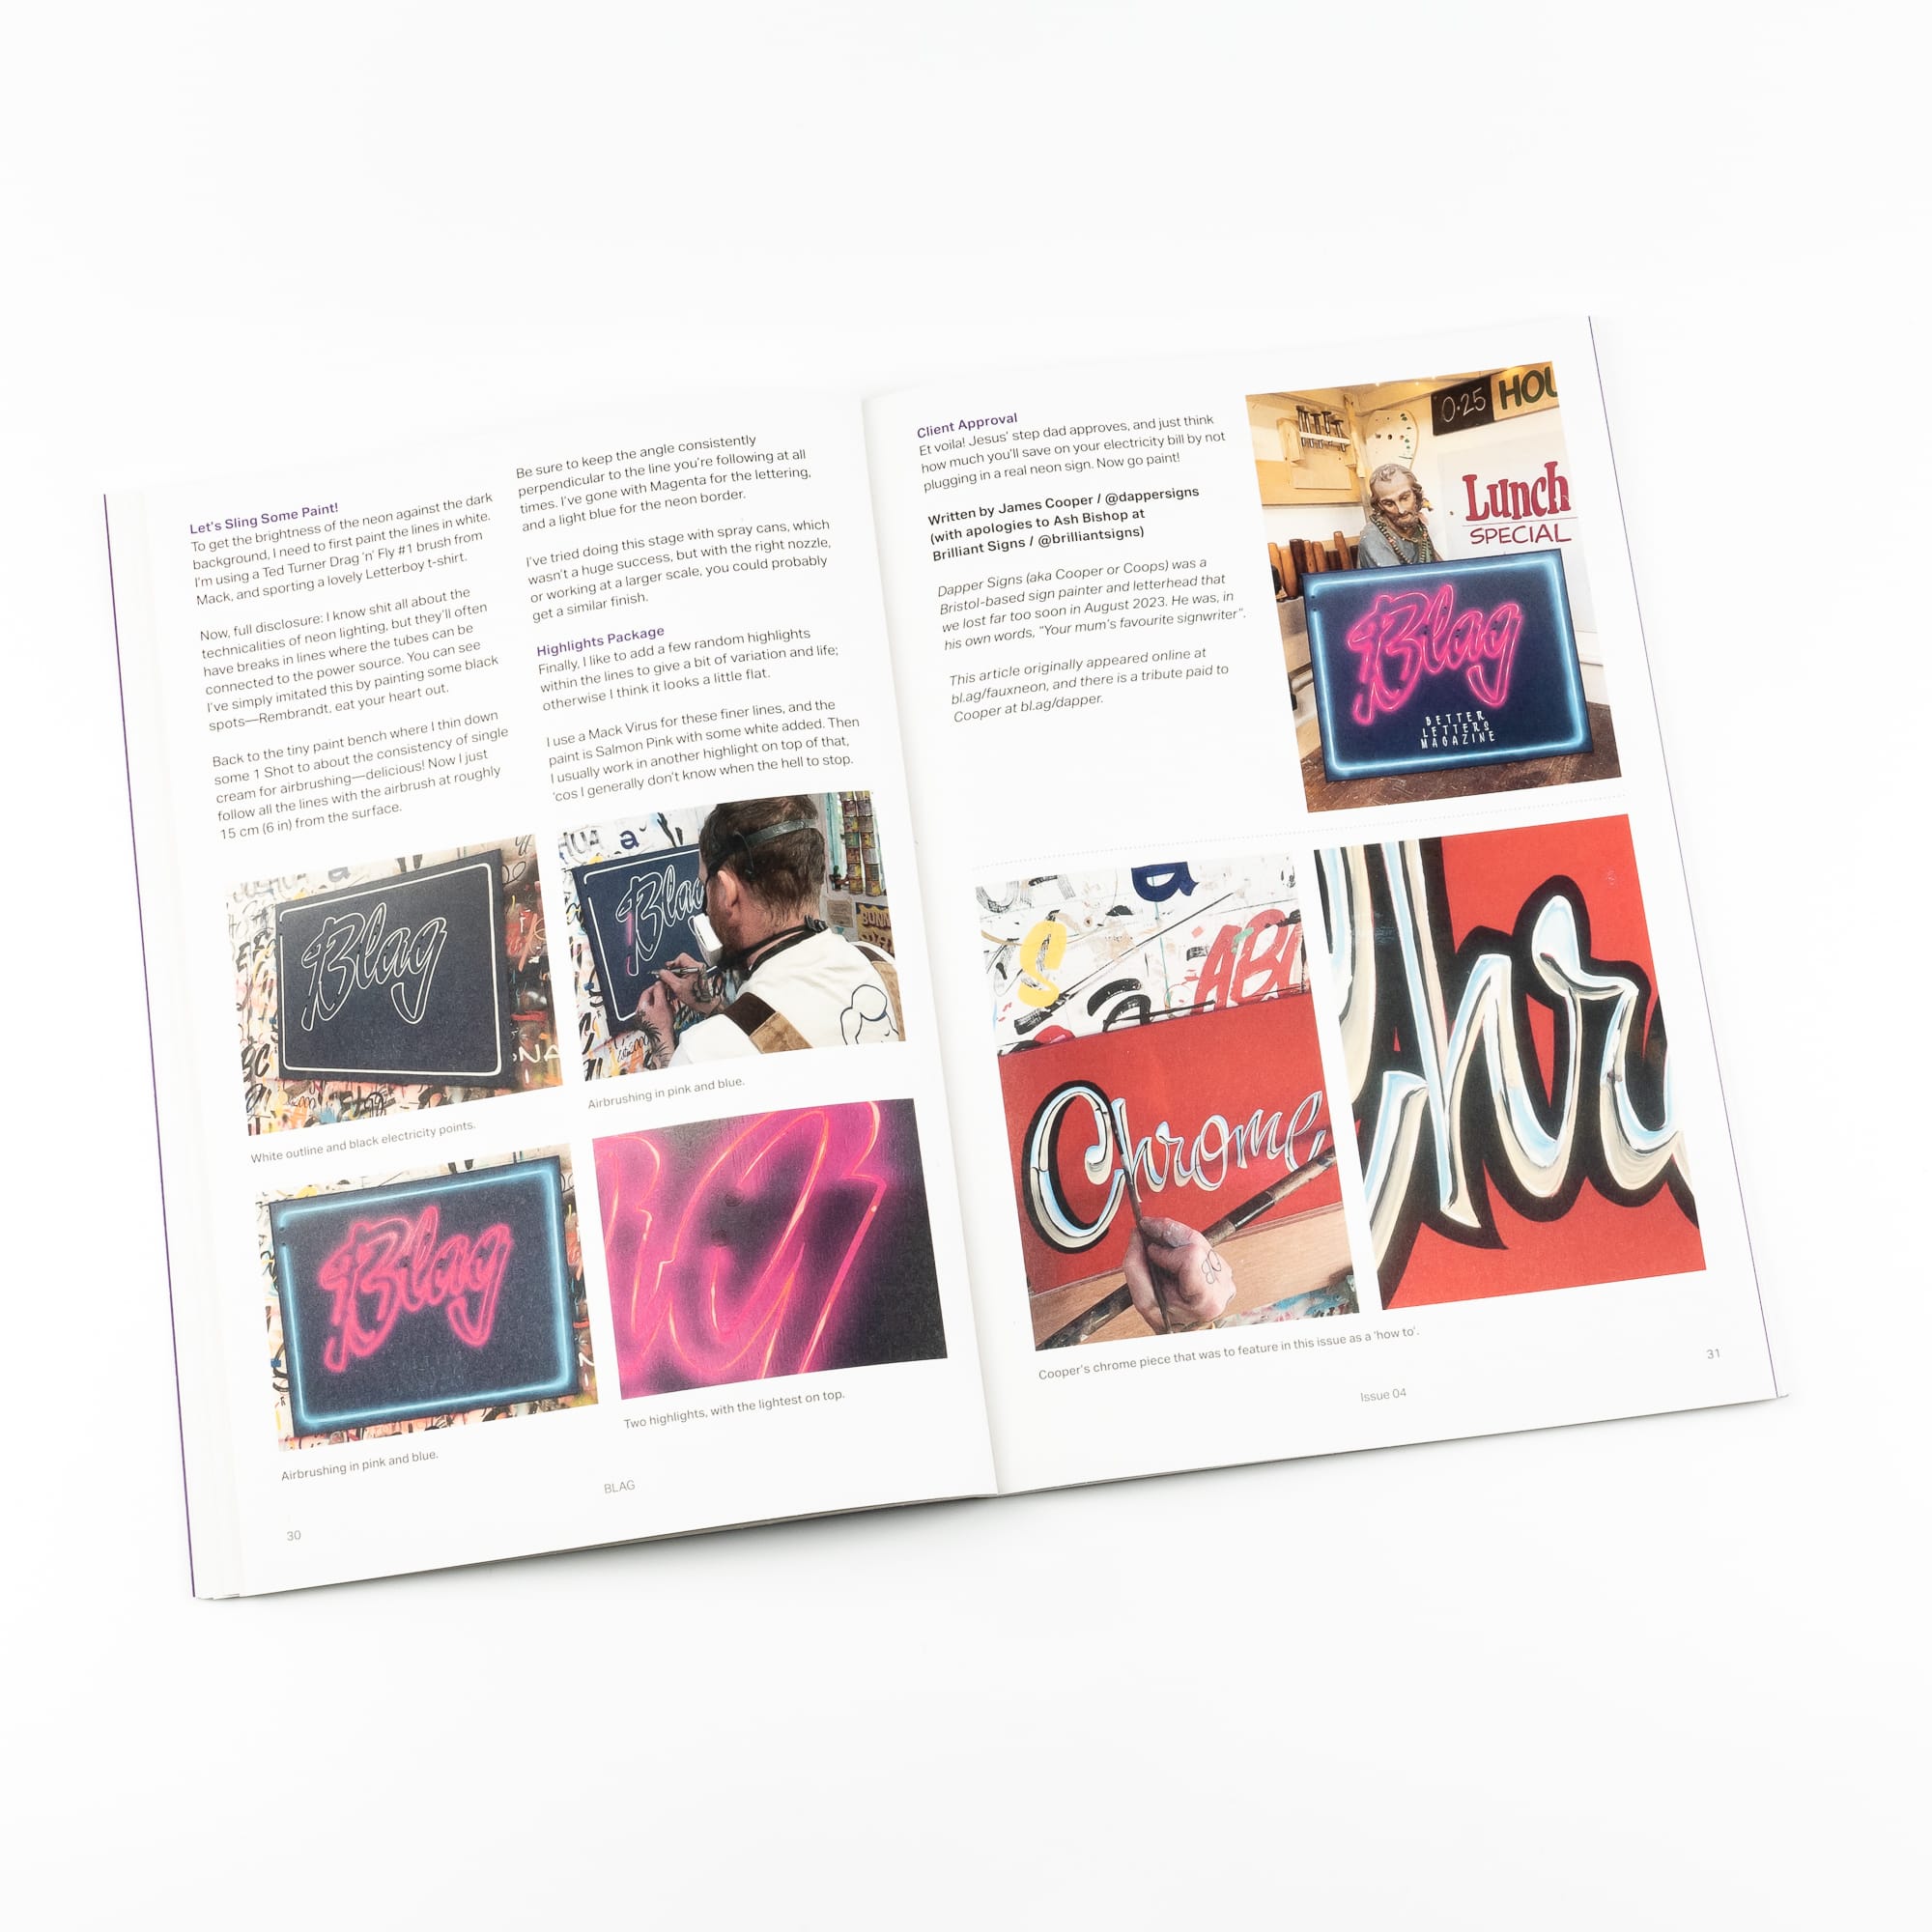 What's Inside Issue 04 of BLAG (Better Letters Magazine)?